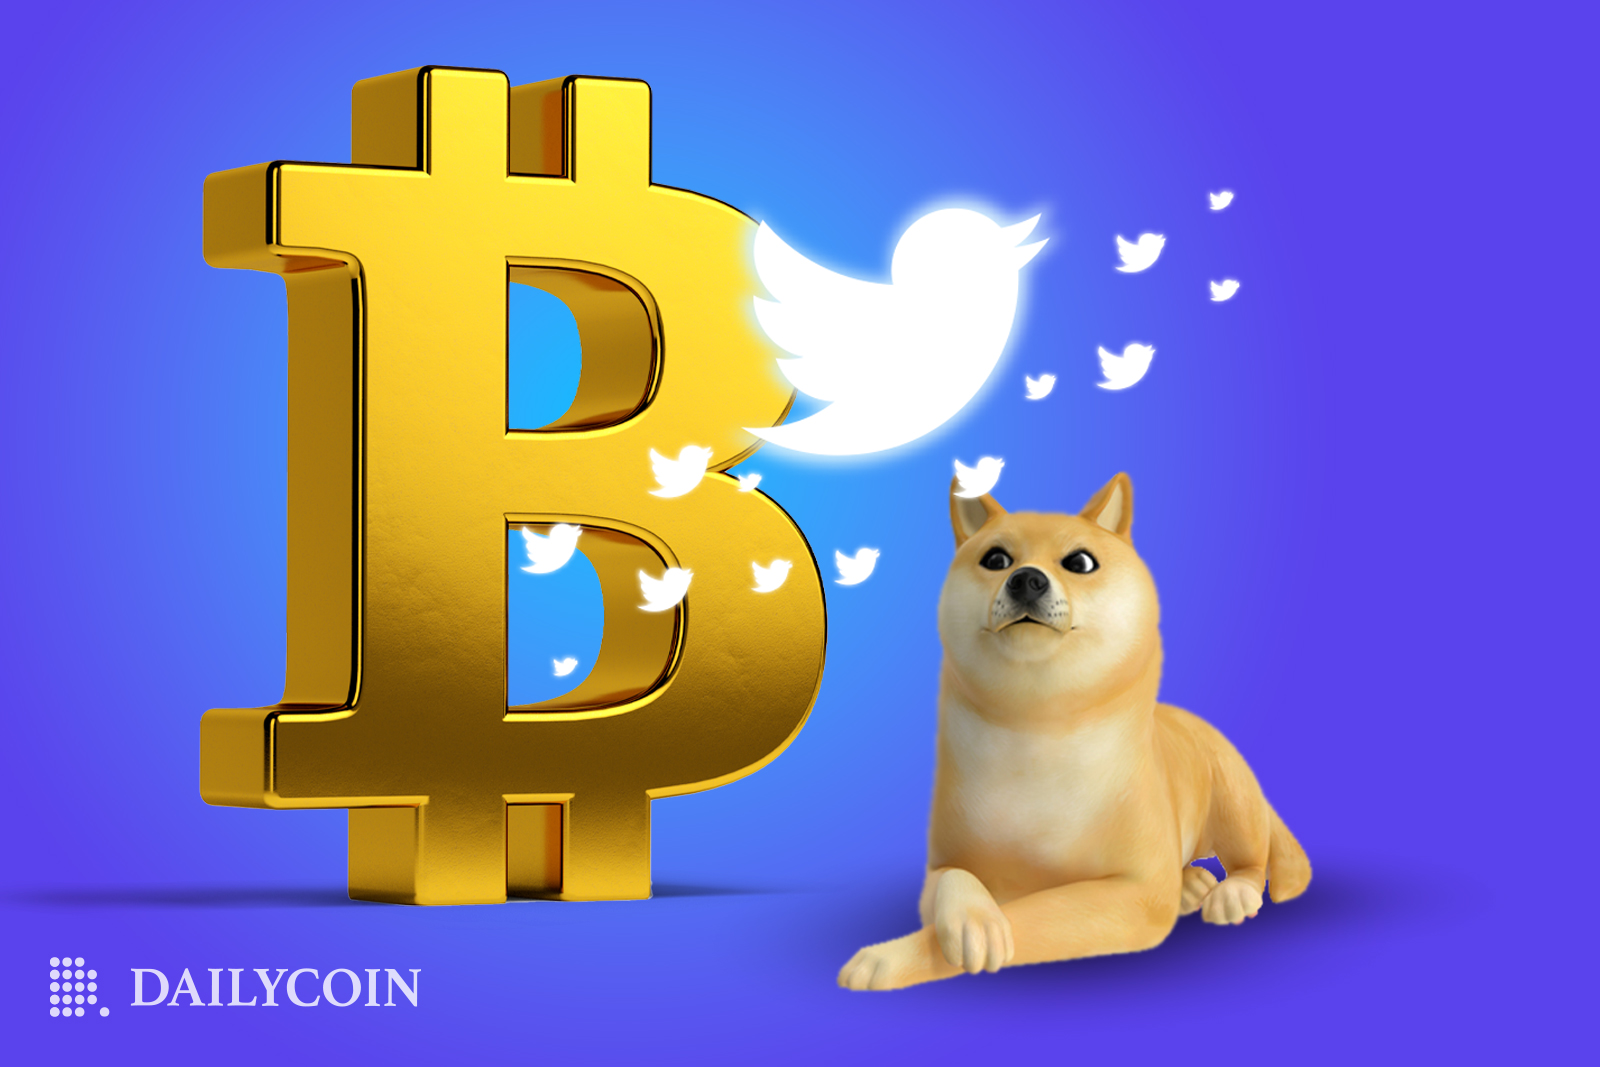 Dogecoin mascot cartoon Shiba Inu dog looking above at a white Twitter logo on a large golden Bitcoin in a sky blue background.